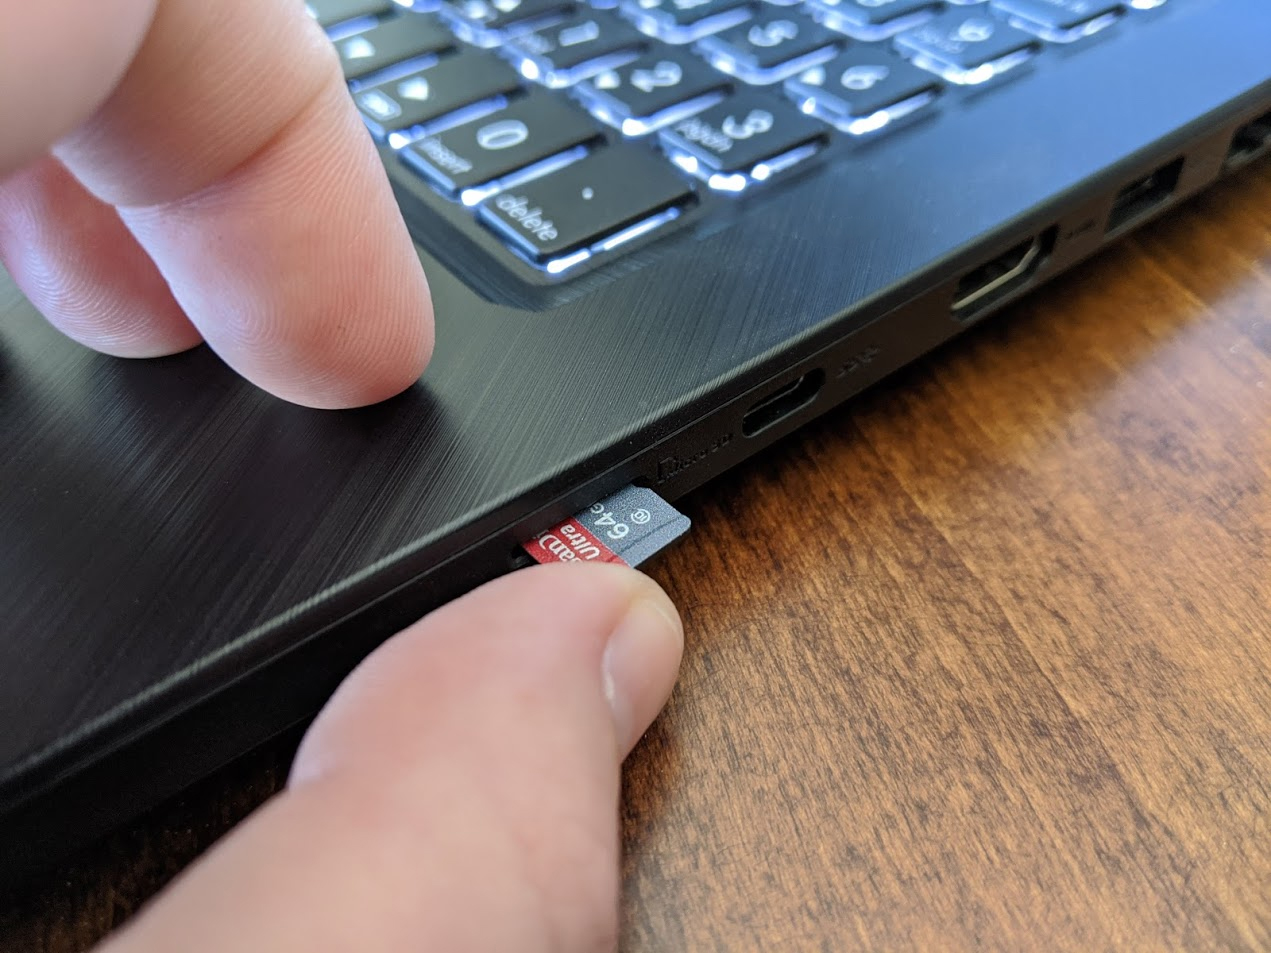 How To Transfer From One Microsd To Another 006